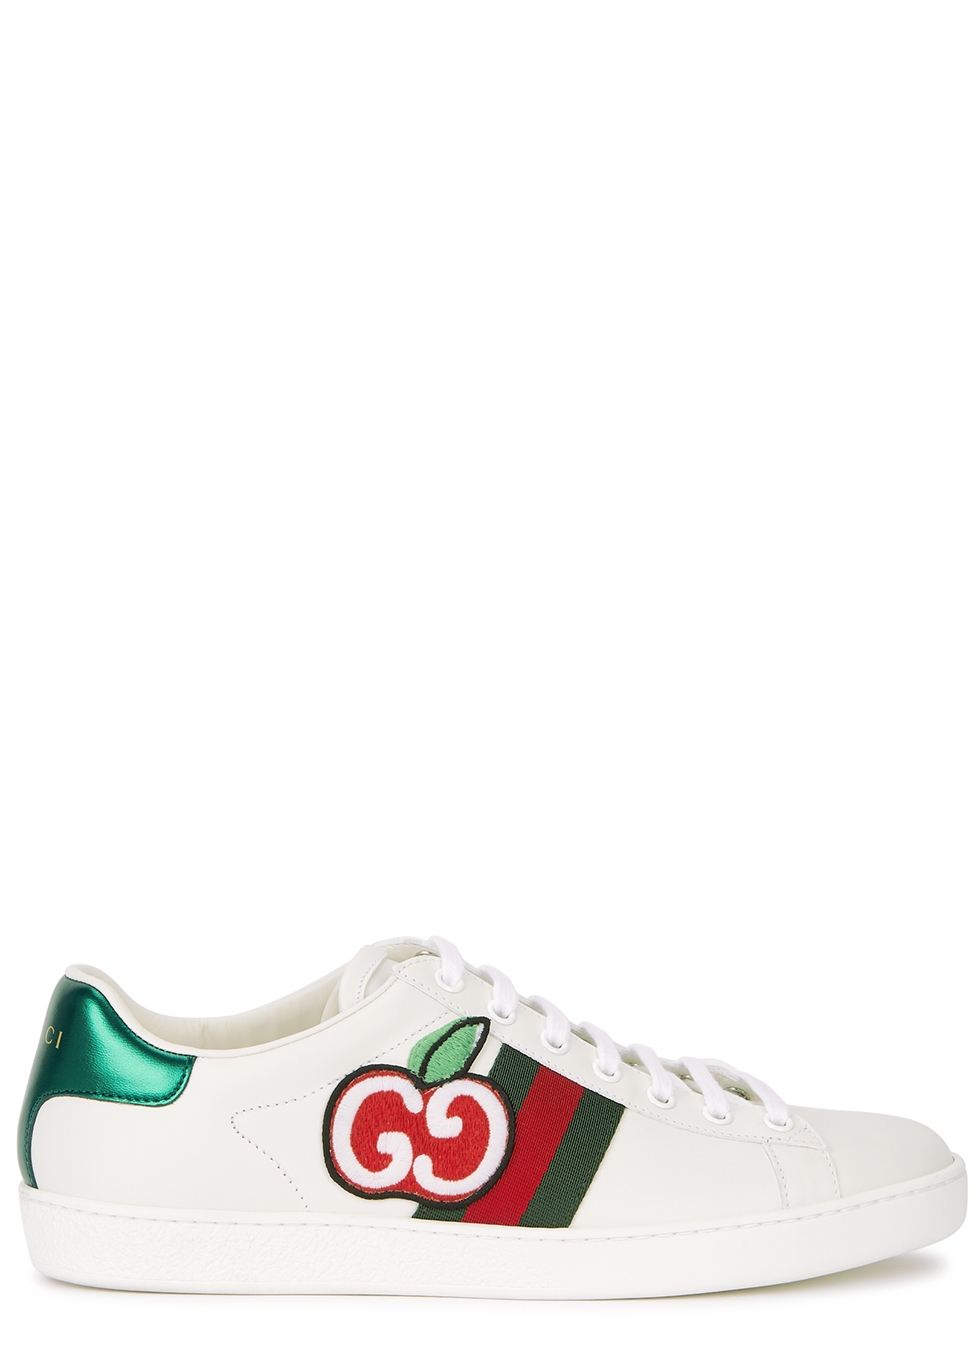 Gucci Ace GG Apple white leather sneakers - Harvey Nichols